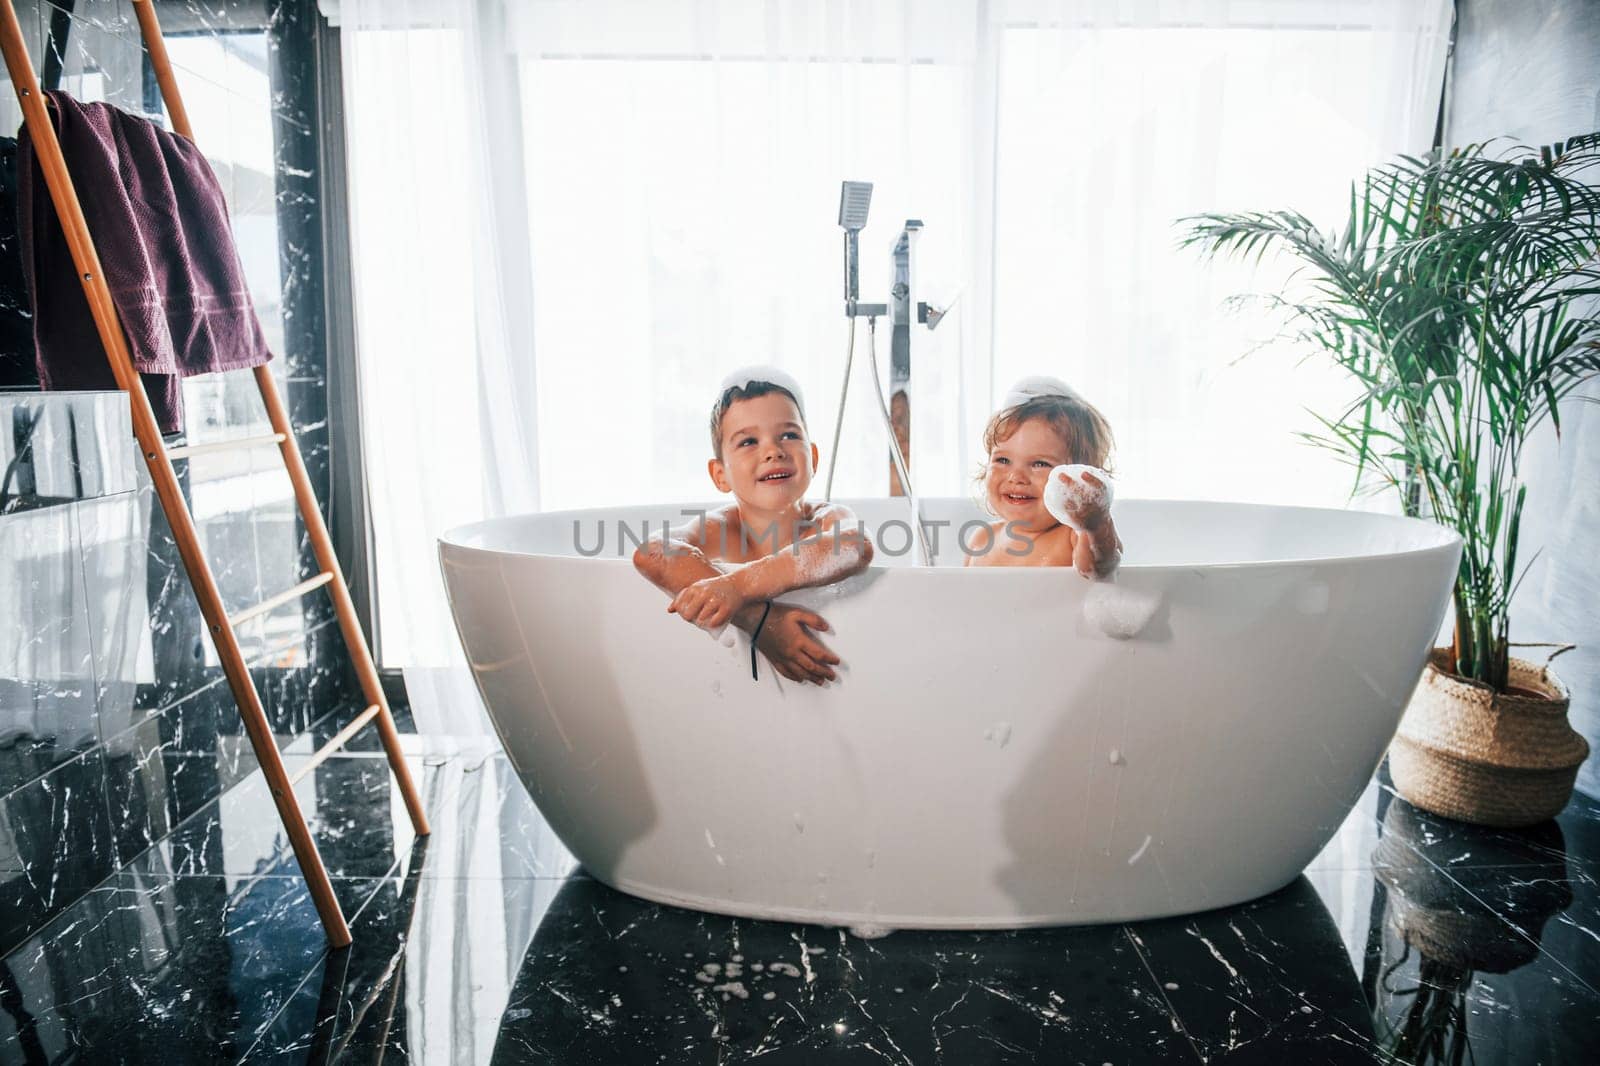 Two kids having fun and washing themselves in the bath at home. Posing for a camera by Standret